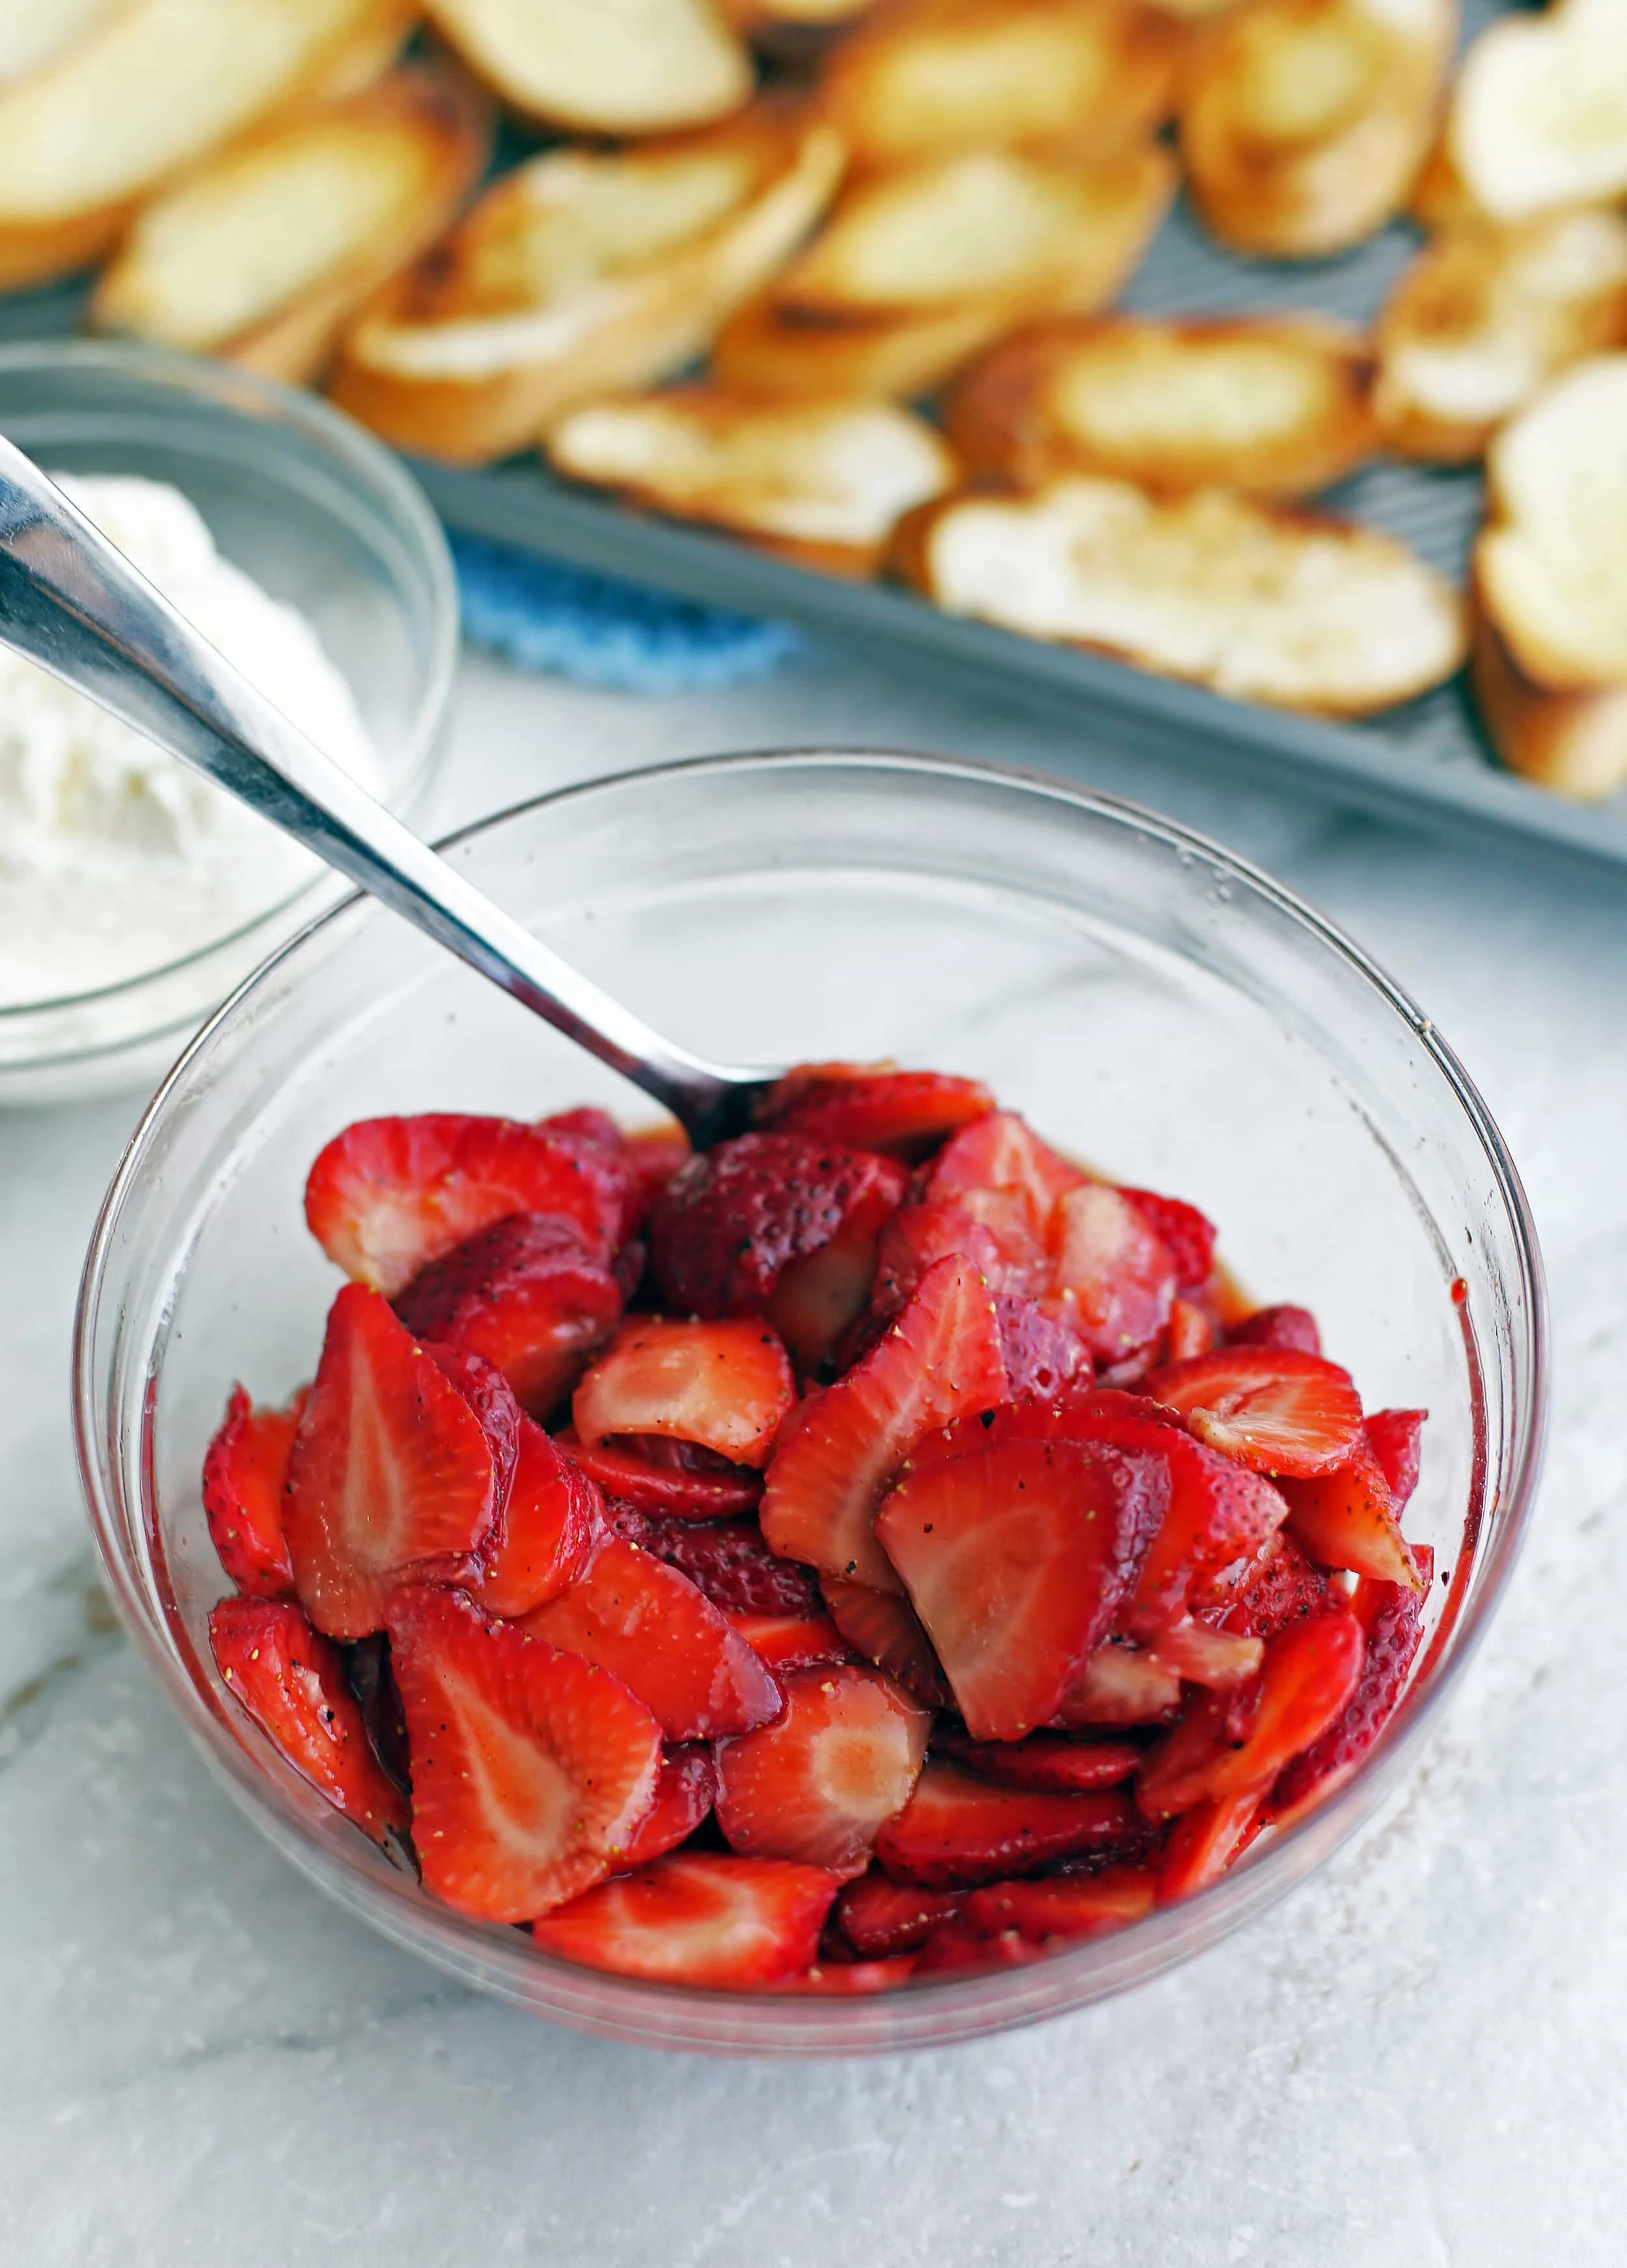 A glass bowl of sliced strawberries that's combined with balsamic vinegar, sugar, and black pepper.